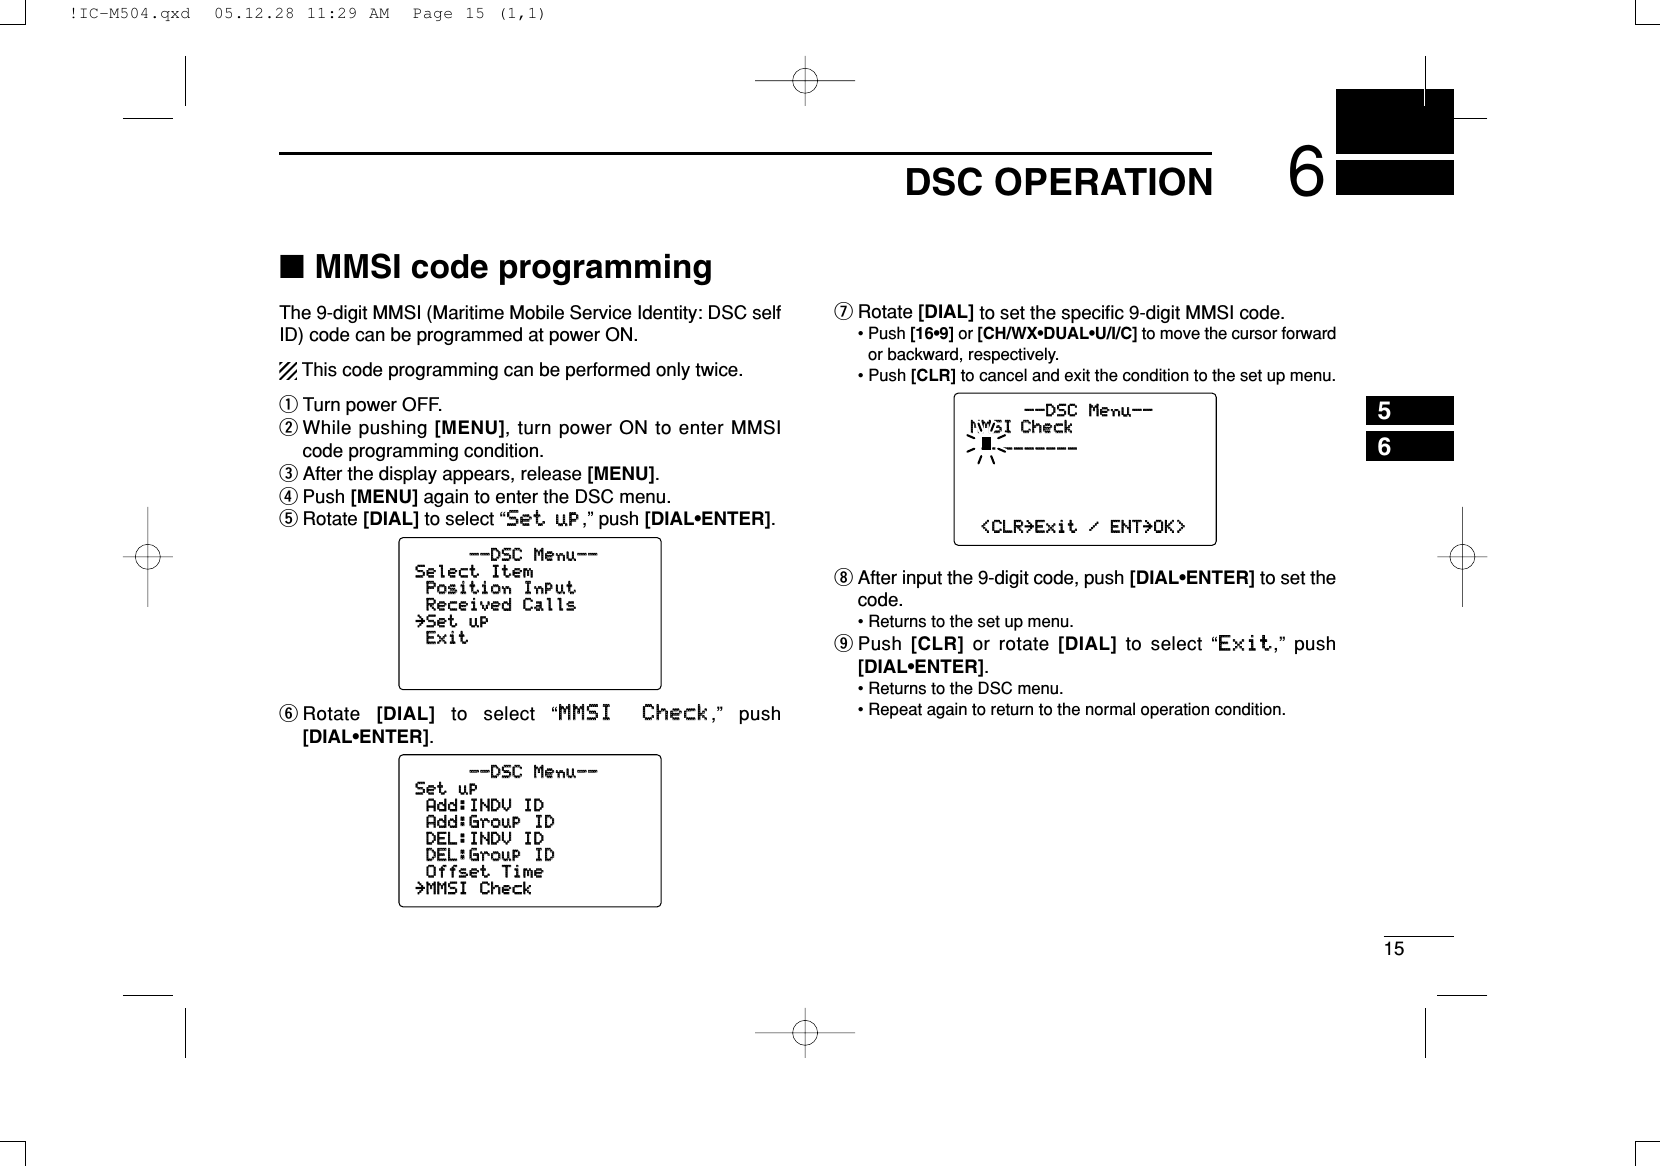 156DSC OPERATION56■MMSI code programmingThe 9-digit MMSI (Maritime Mobile Service Identity: DSC selfID) code can be programmed at power ON.This code programming can be performed only twice.qTurn power OFF.wWhile pushing [MENU], turn power ON to enter MMSIcode programming condition.eAfter the display appears, release [MENU].rPush [MENU] again to enter the DSC menu.tRotate [DIAL] to select “SSeett uupp,” push [DIAL•ENTER].yRotate  [DIAL] to select “MMMMSSII CChheecckk,” push[DIAL•ENTER].uRotate [DIAL]to setthe speciﬁc 9-digit MMSI code.• Push [16•9] or [CH/WX•DUAL•U/I/C] to move the cursor forwardor backward, respectively.• Push [CLR] to cancel and exit the condition to the set up menu.iAfter input the 9-digit code, push [DIAL•ENTER] to set thecode.• Returns to the set up menu.oPush  [CLR] or rotate [DIAL] to select “EExxiitt,” push[DIAL•ENTER].• Returns to the DSC menu.• Repeat again to return to the normal operation condition.--DSC--DSC Menu--Menu--MMSI CheckMMSI Check__________________&lt;CLR&lt;CLR˘ExitExit /ENTENT˘OK&gt;OK&gt;--DSC--DSC Menu--Menu--SetSet upupAdd:INDVAdd:INDV IDIDAdd:GroupAdd:Group IDIDDEL:INDVDEL:INDV IDIDDEL:GroupDEL:Group IDIDOffsetOffset TimeTime˘MMSIMMSI CheckCheck--DSC--DSC Menu--Menu--SelectSelect ItemItemPositionPosition InputInputReceivedReceived CallsCalls˘SetSet upupExitExit!IC-M504.qxd  05.12.28 11:29 AM  Page 15 (1,1)